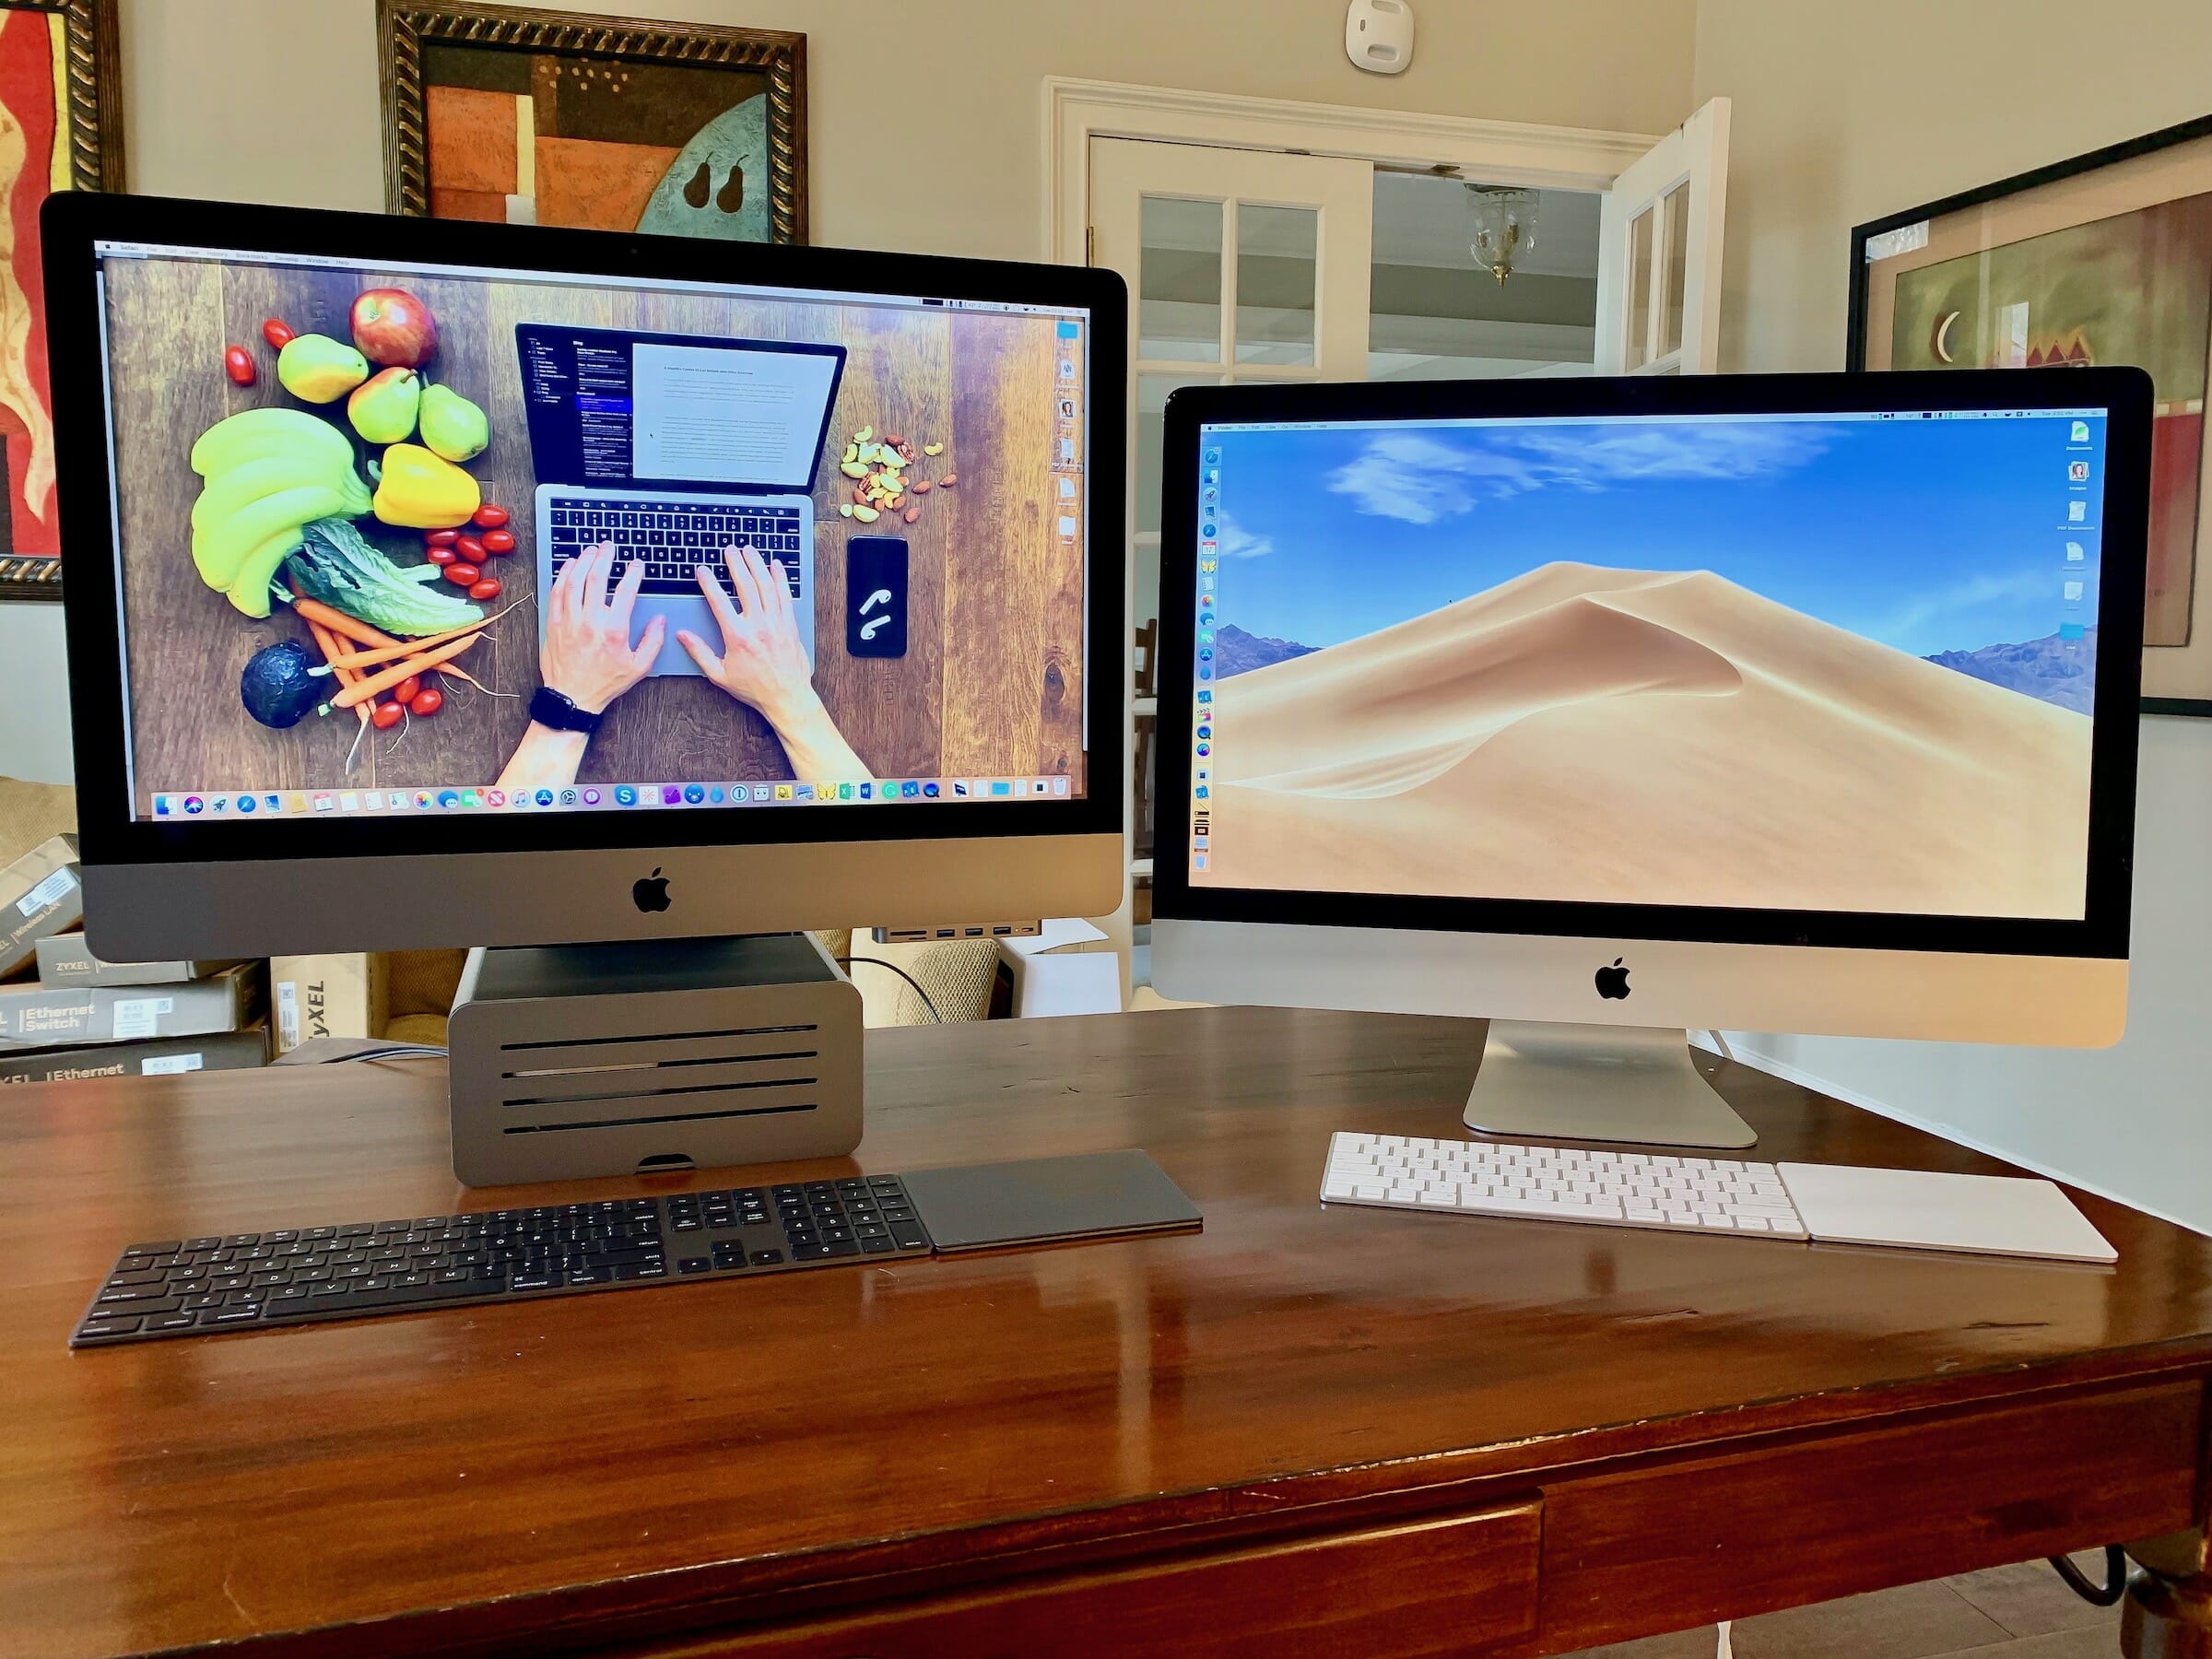 Imac Pro Review And Comparison To The 5k Imac Upgrade Guide